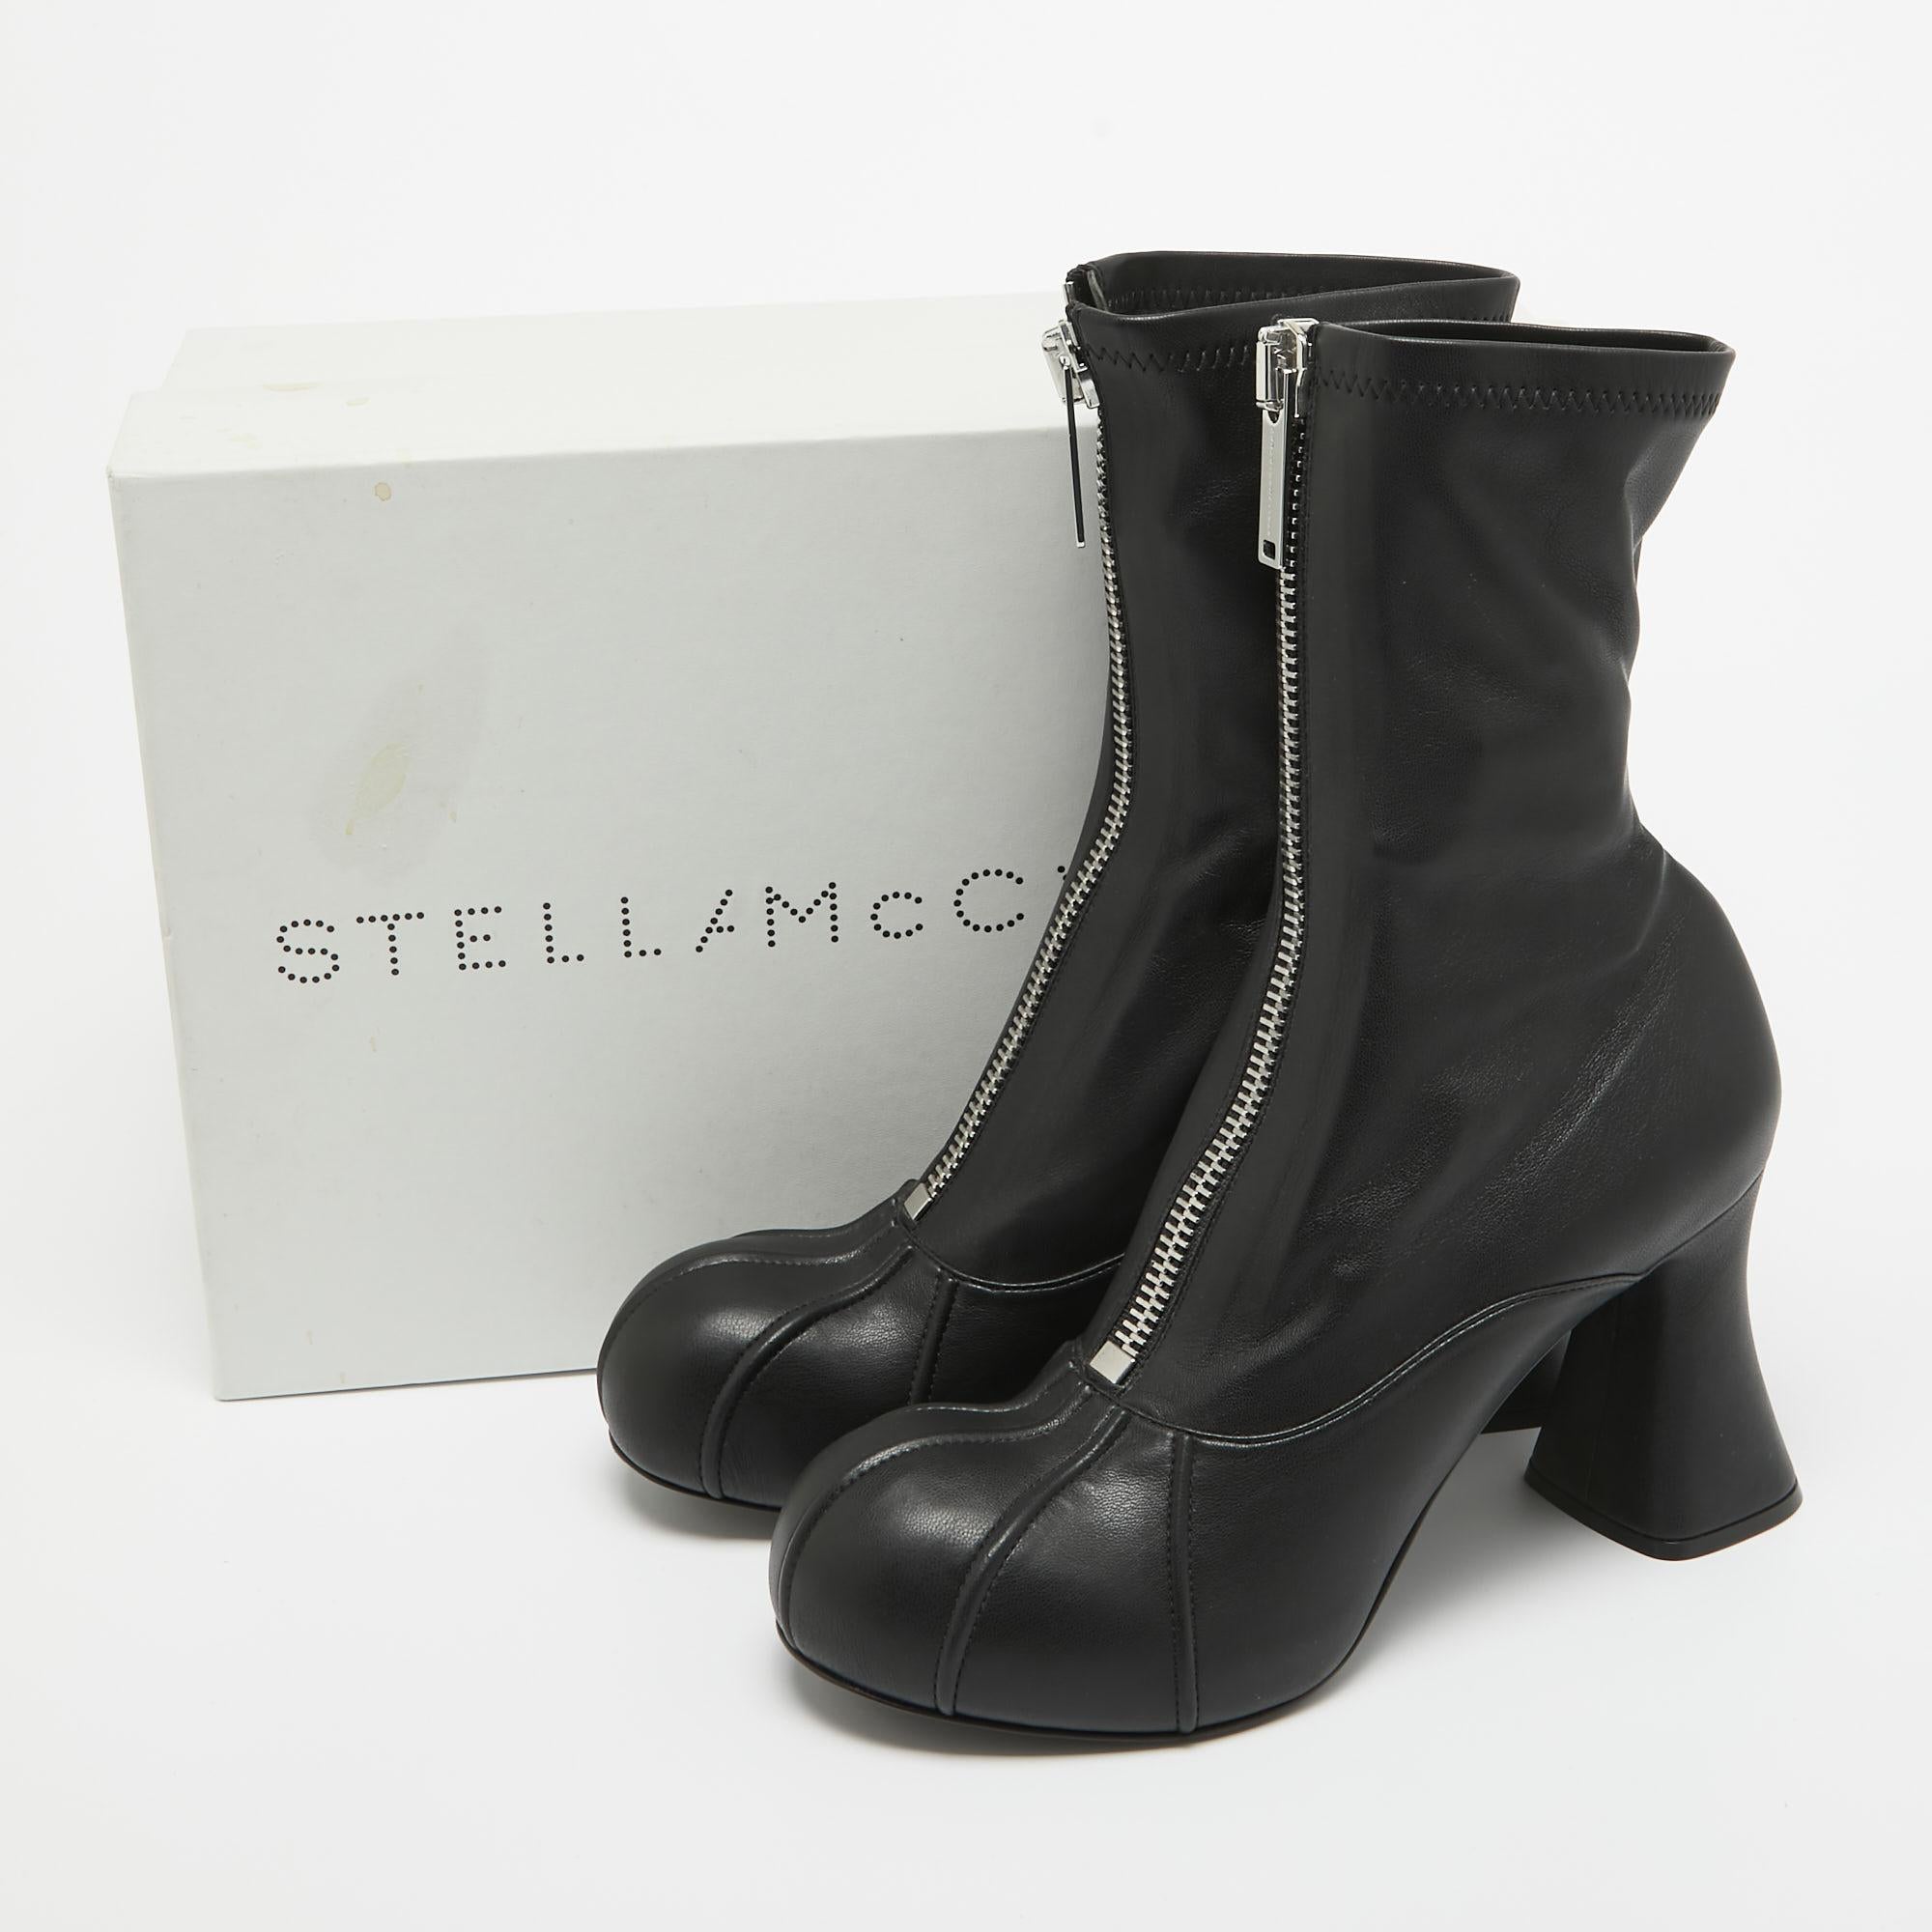 Stella McCartney Black Faux Leather Duck City Ankle Boots Size 41 For Sale 5